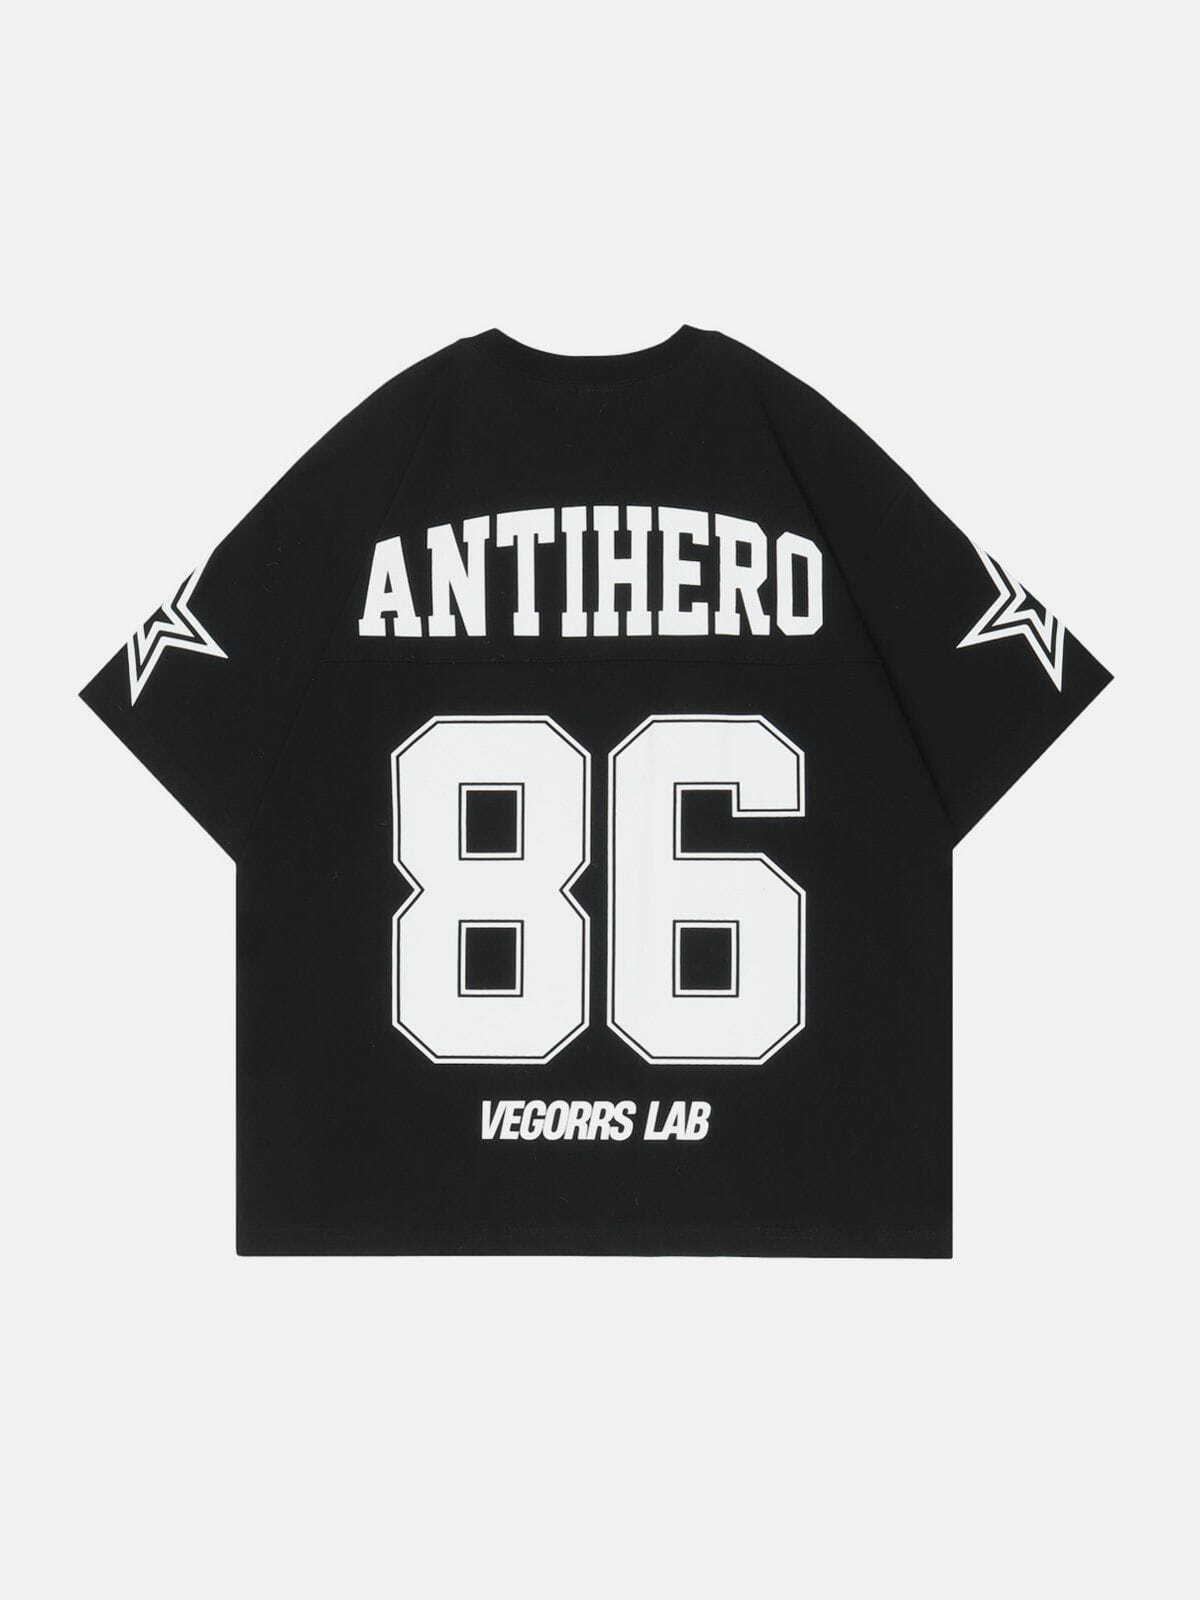 youthful numbers tee edgy  retro streetwear with vibrant graphics 4557